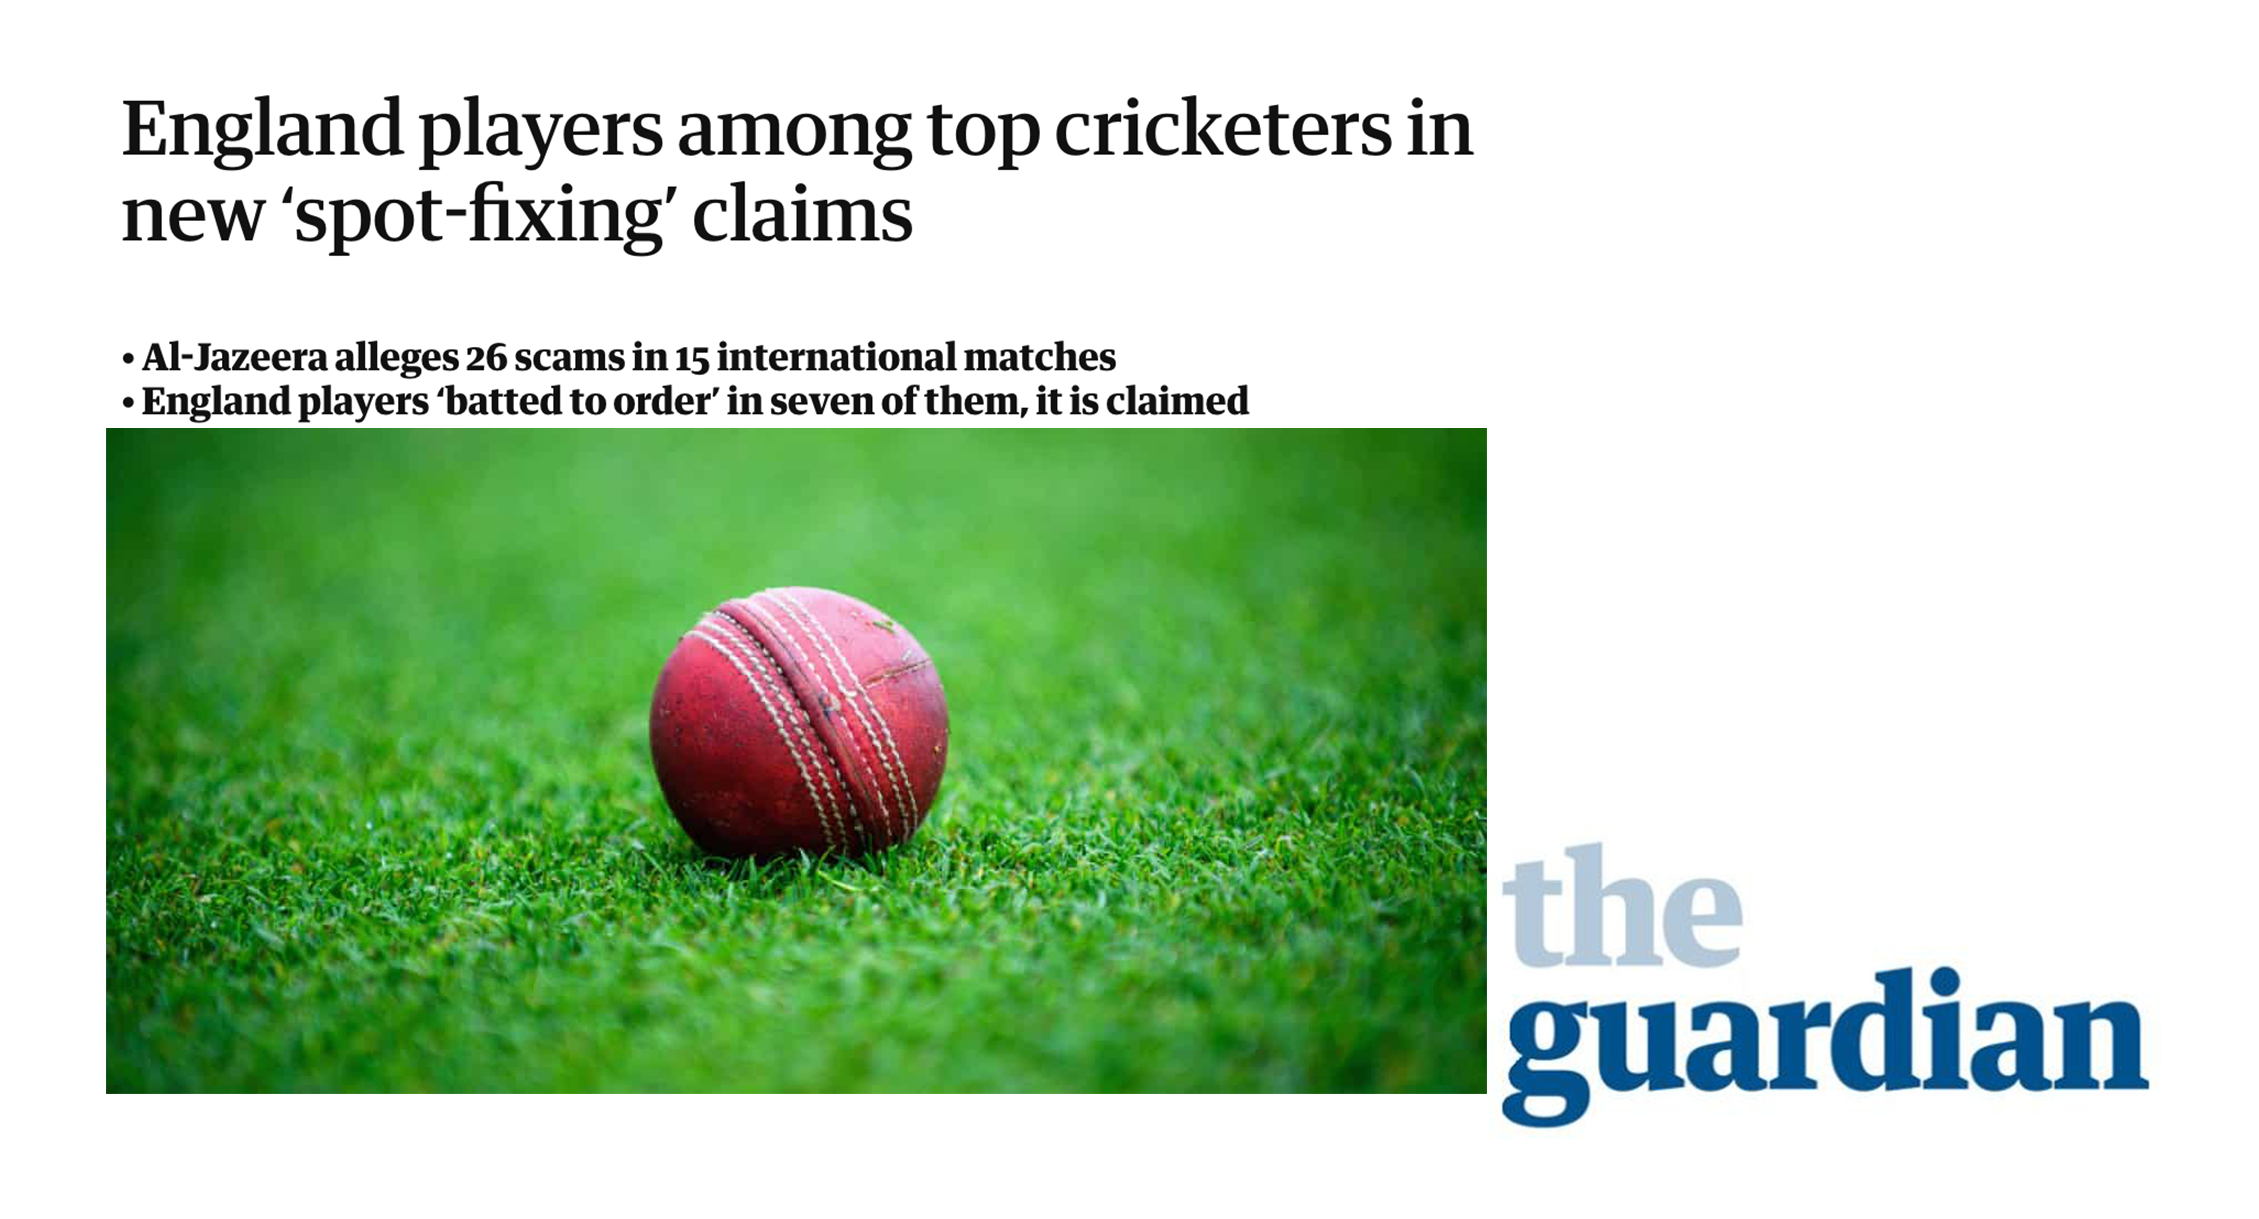 England players among top cricketers in new ‘spot-fixing’ claims